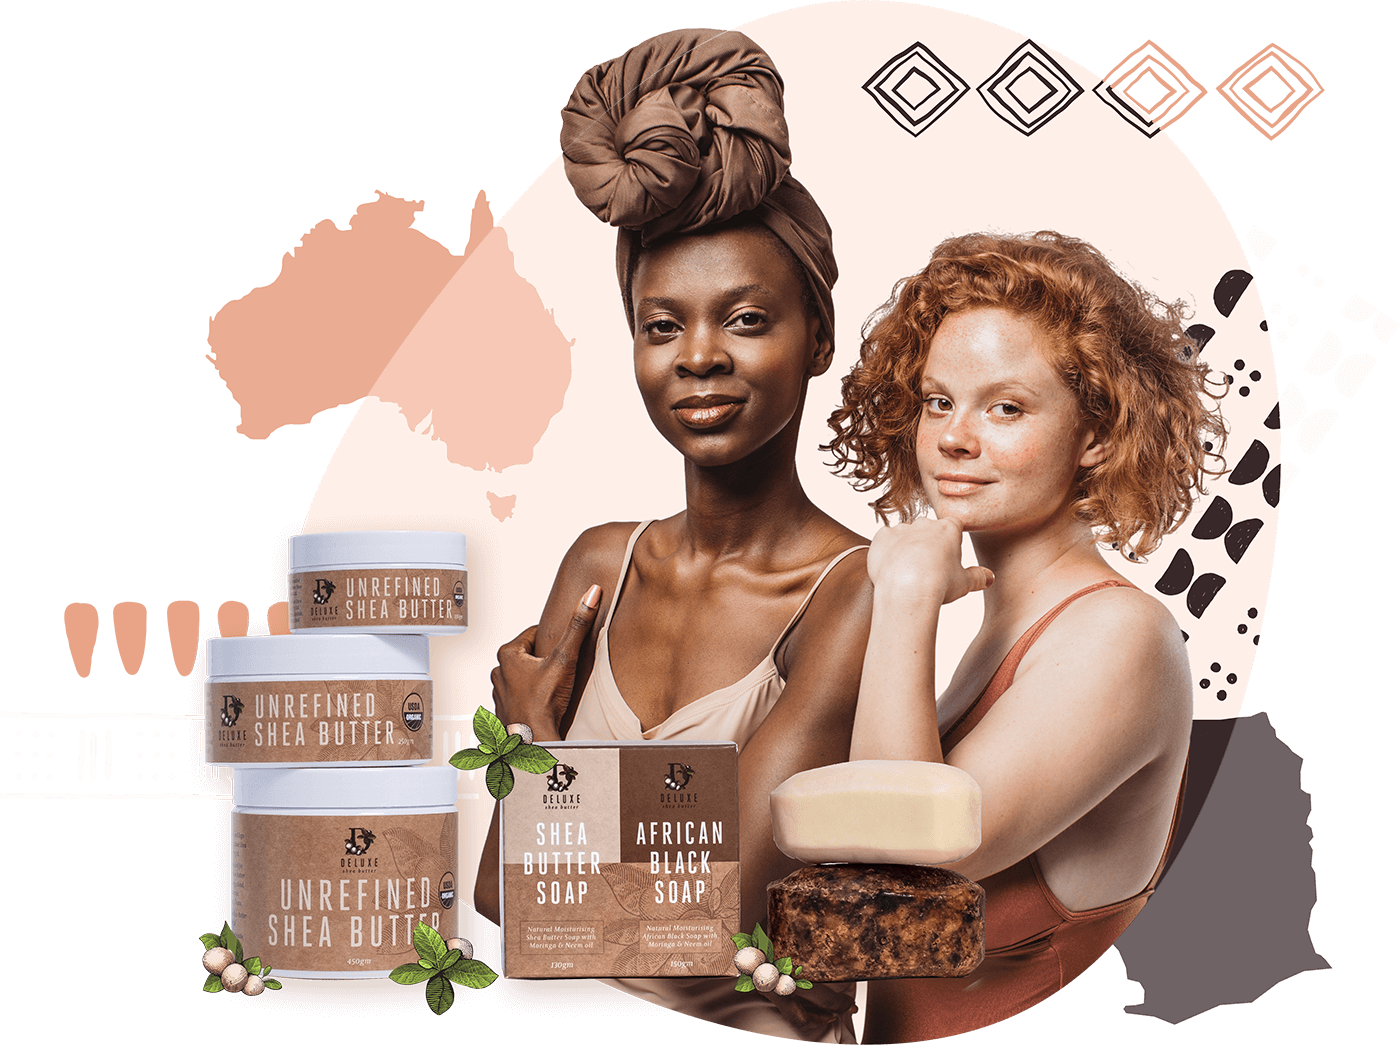 Deluxe Shea Butter Hero image showcasing product range, maps of Australia and Ghana, and two models.